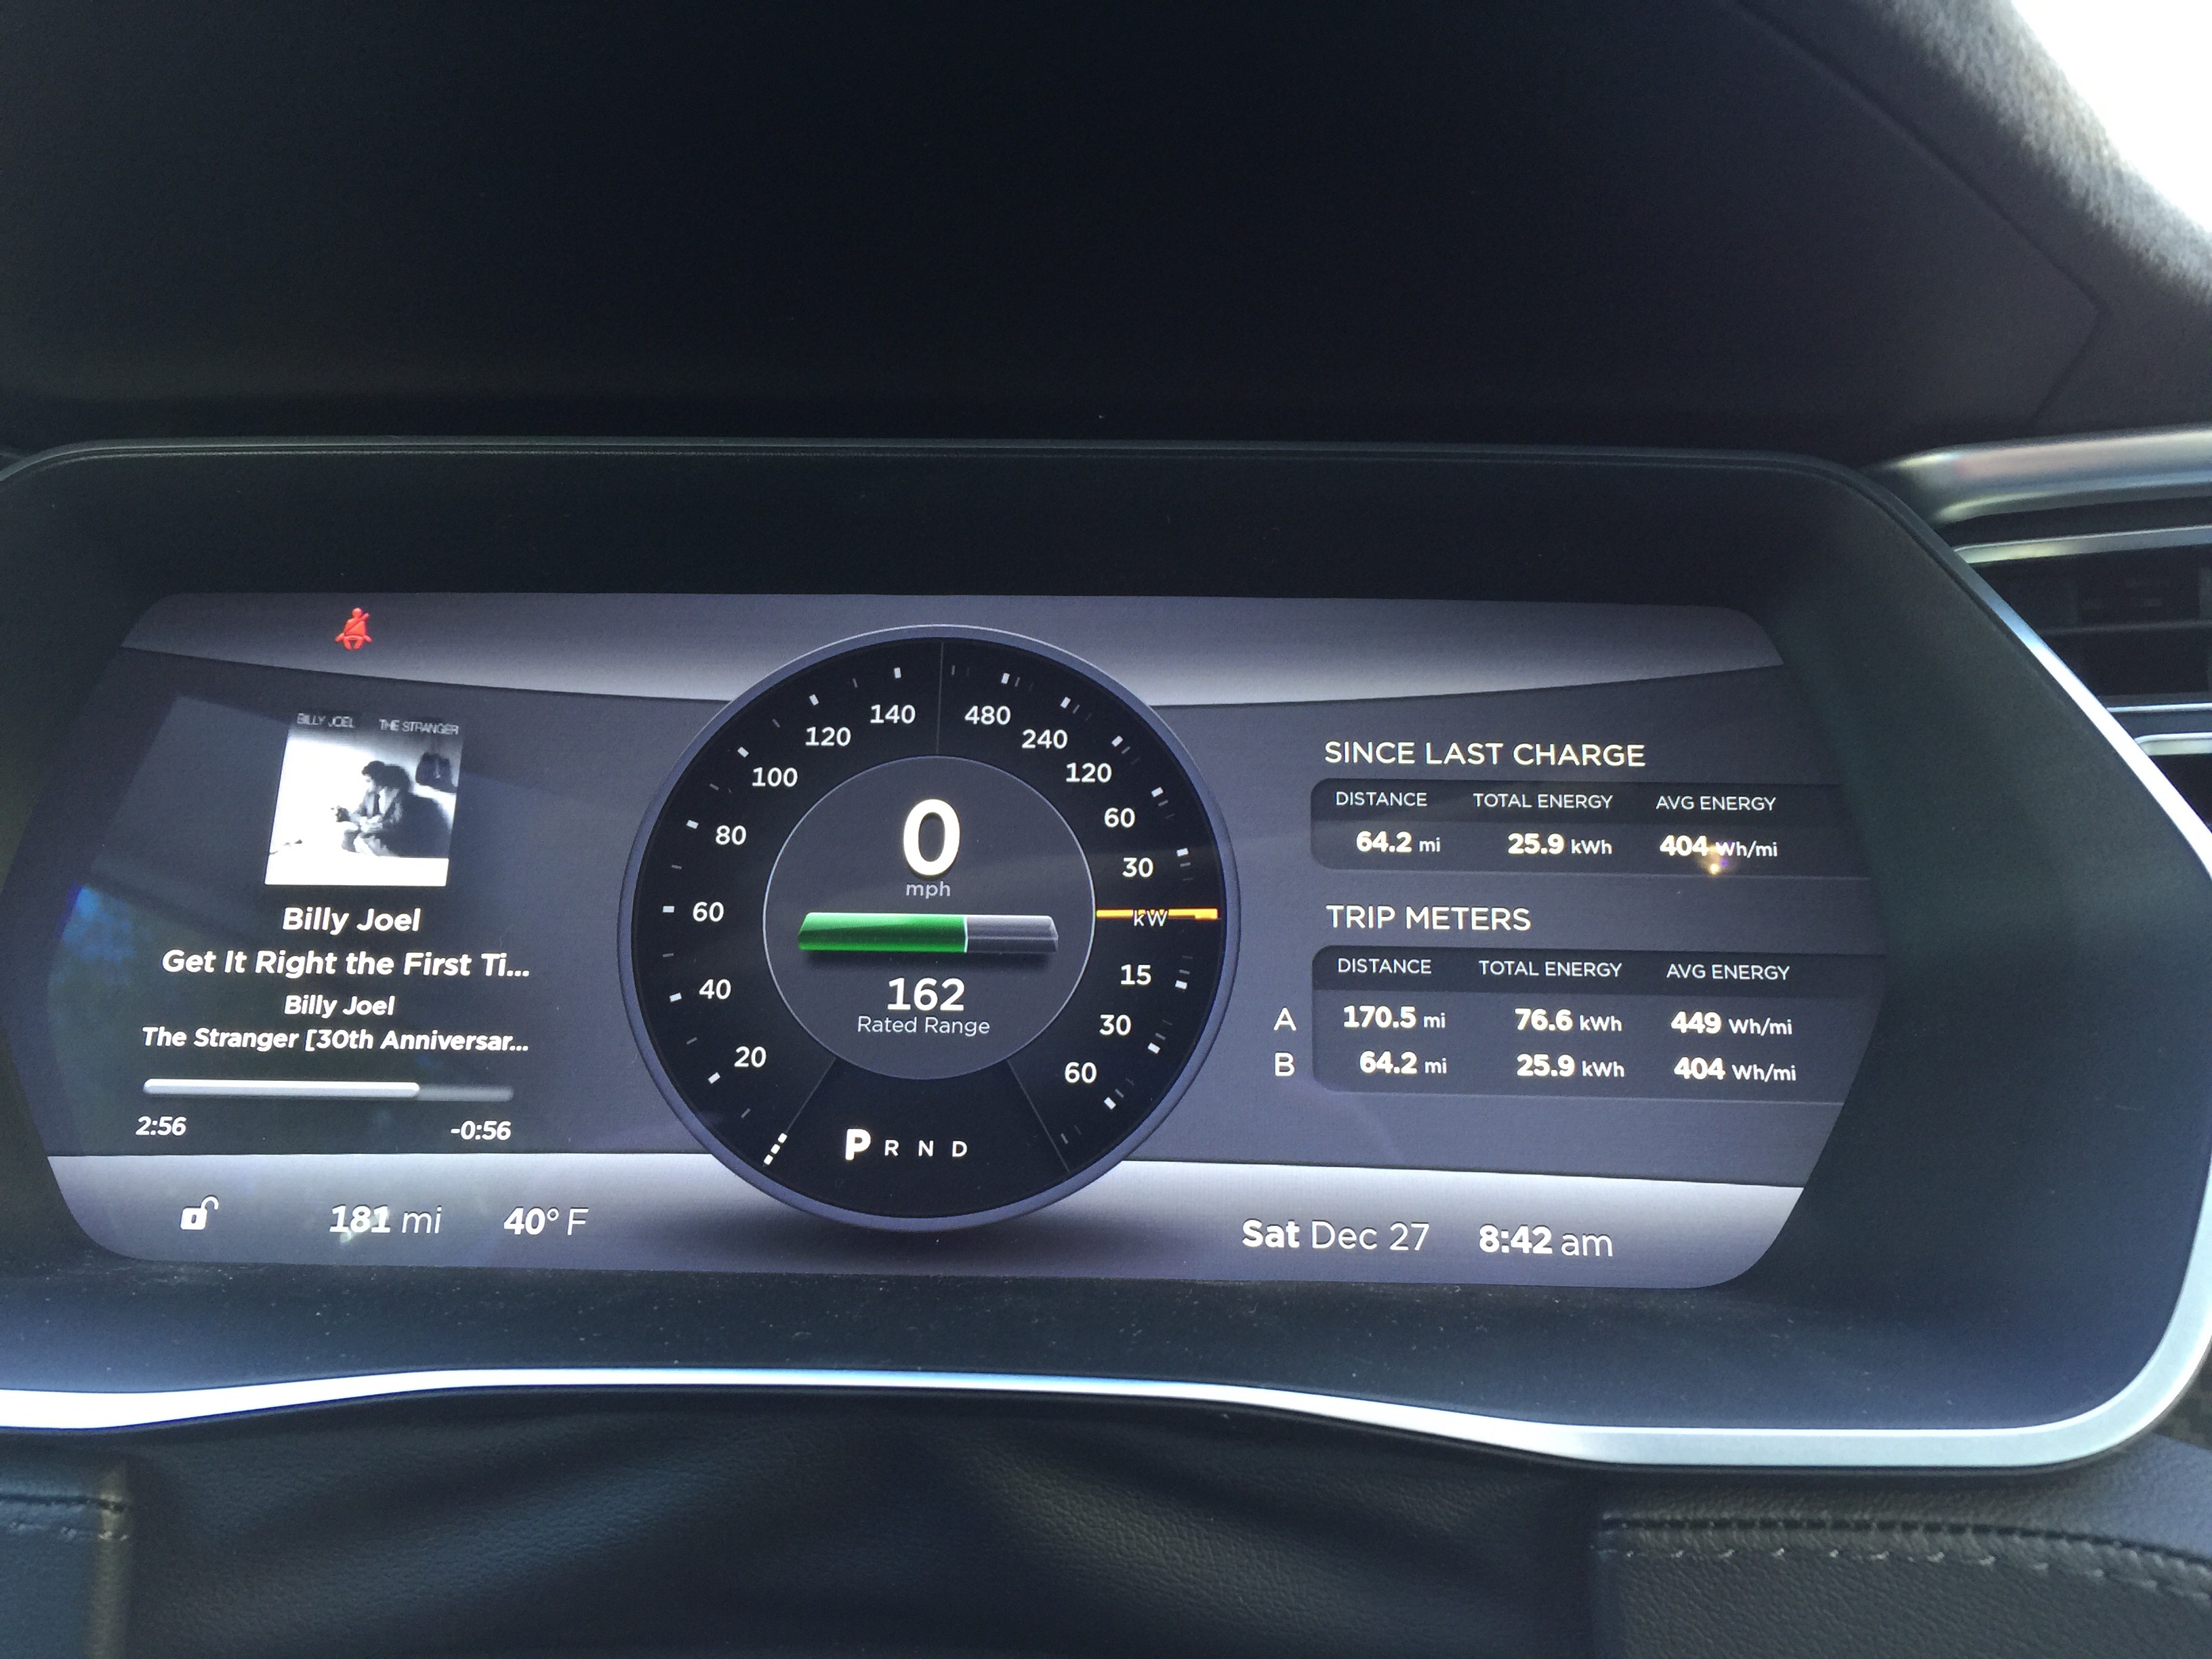 How to get the trip display on the dashboard? | Tesla Motors Club